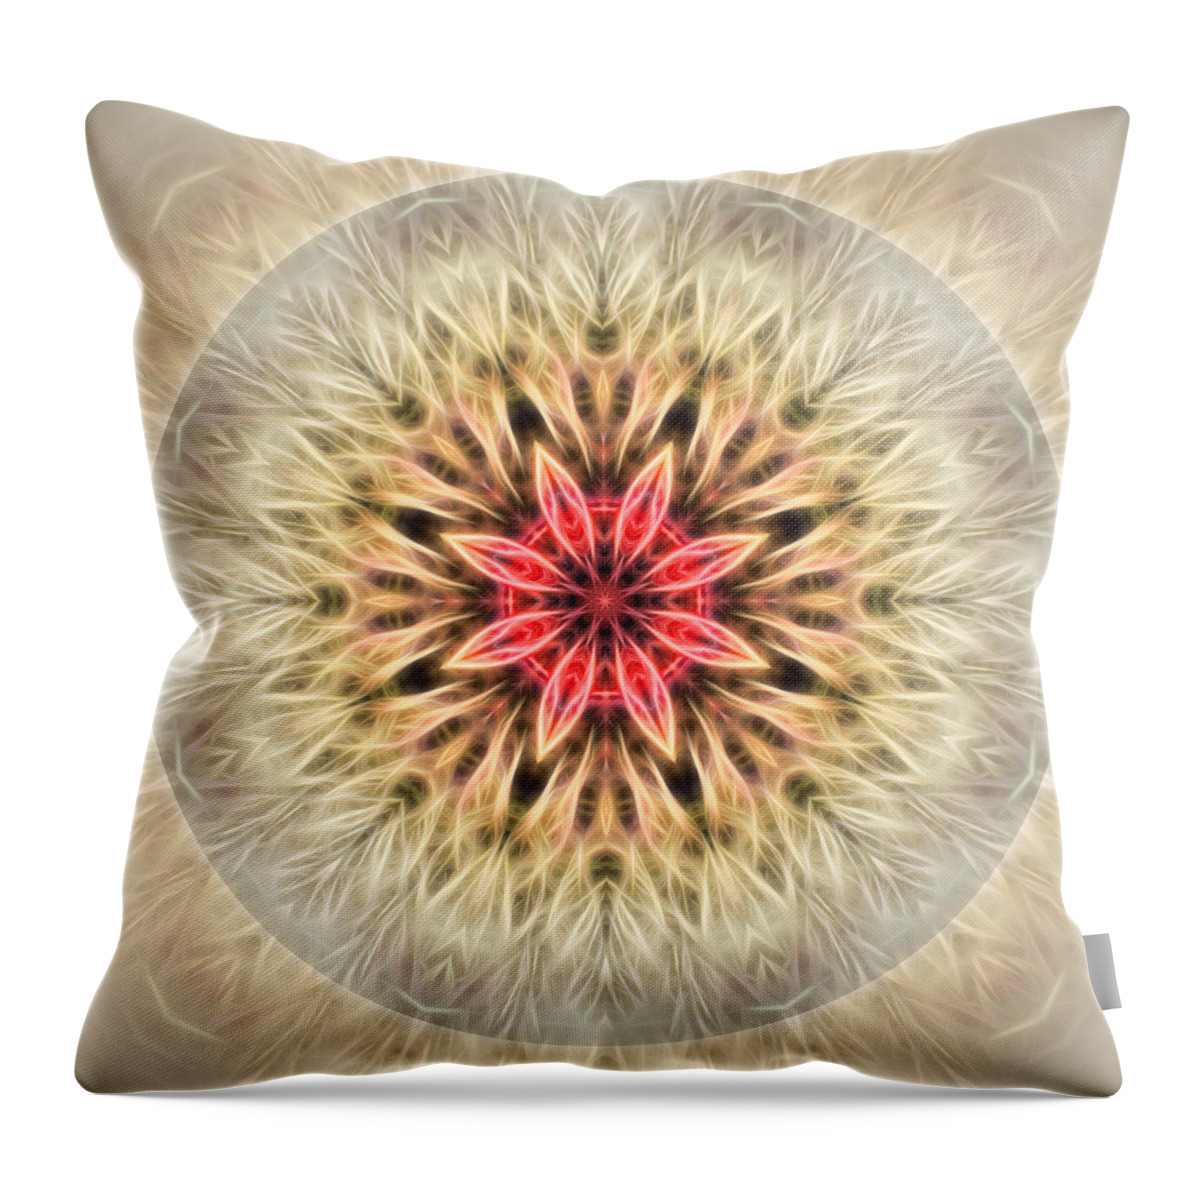 Mandala Throw Pillow featuring the digital art Love From Within Mandala by Beth Sawickie